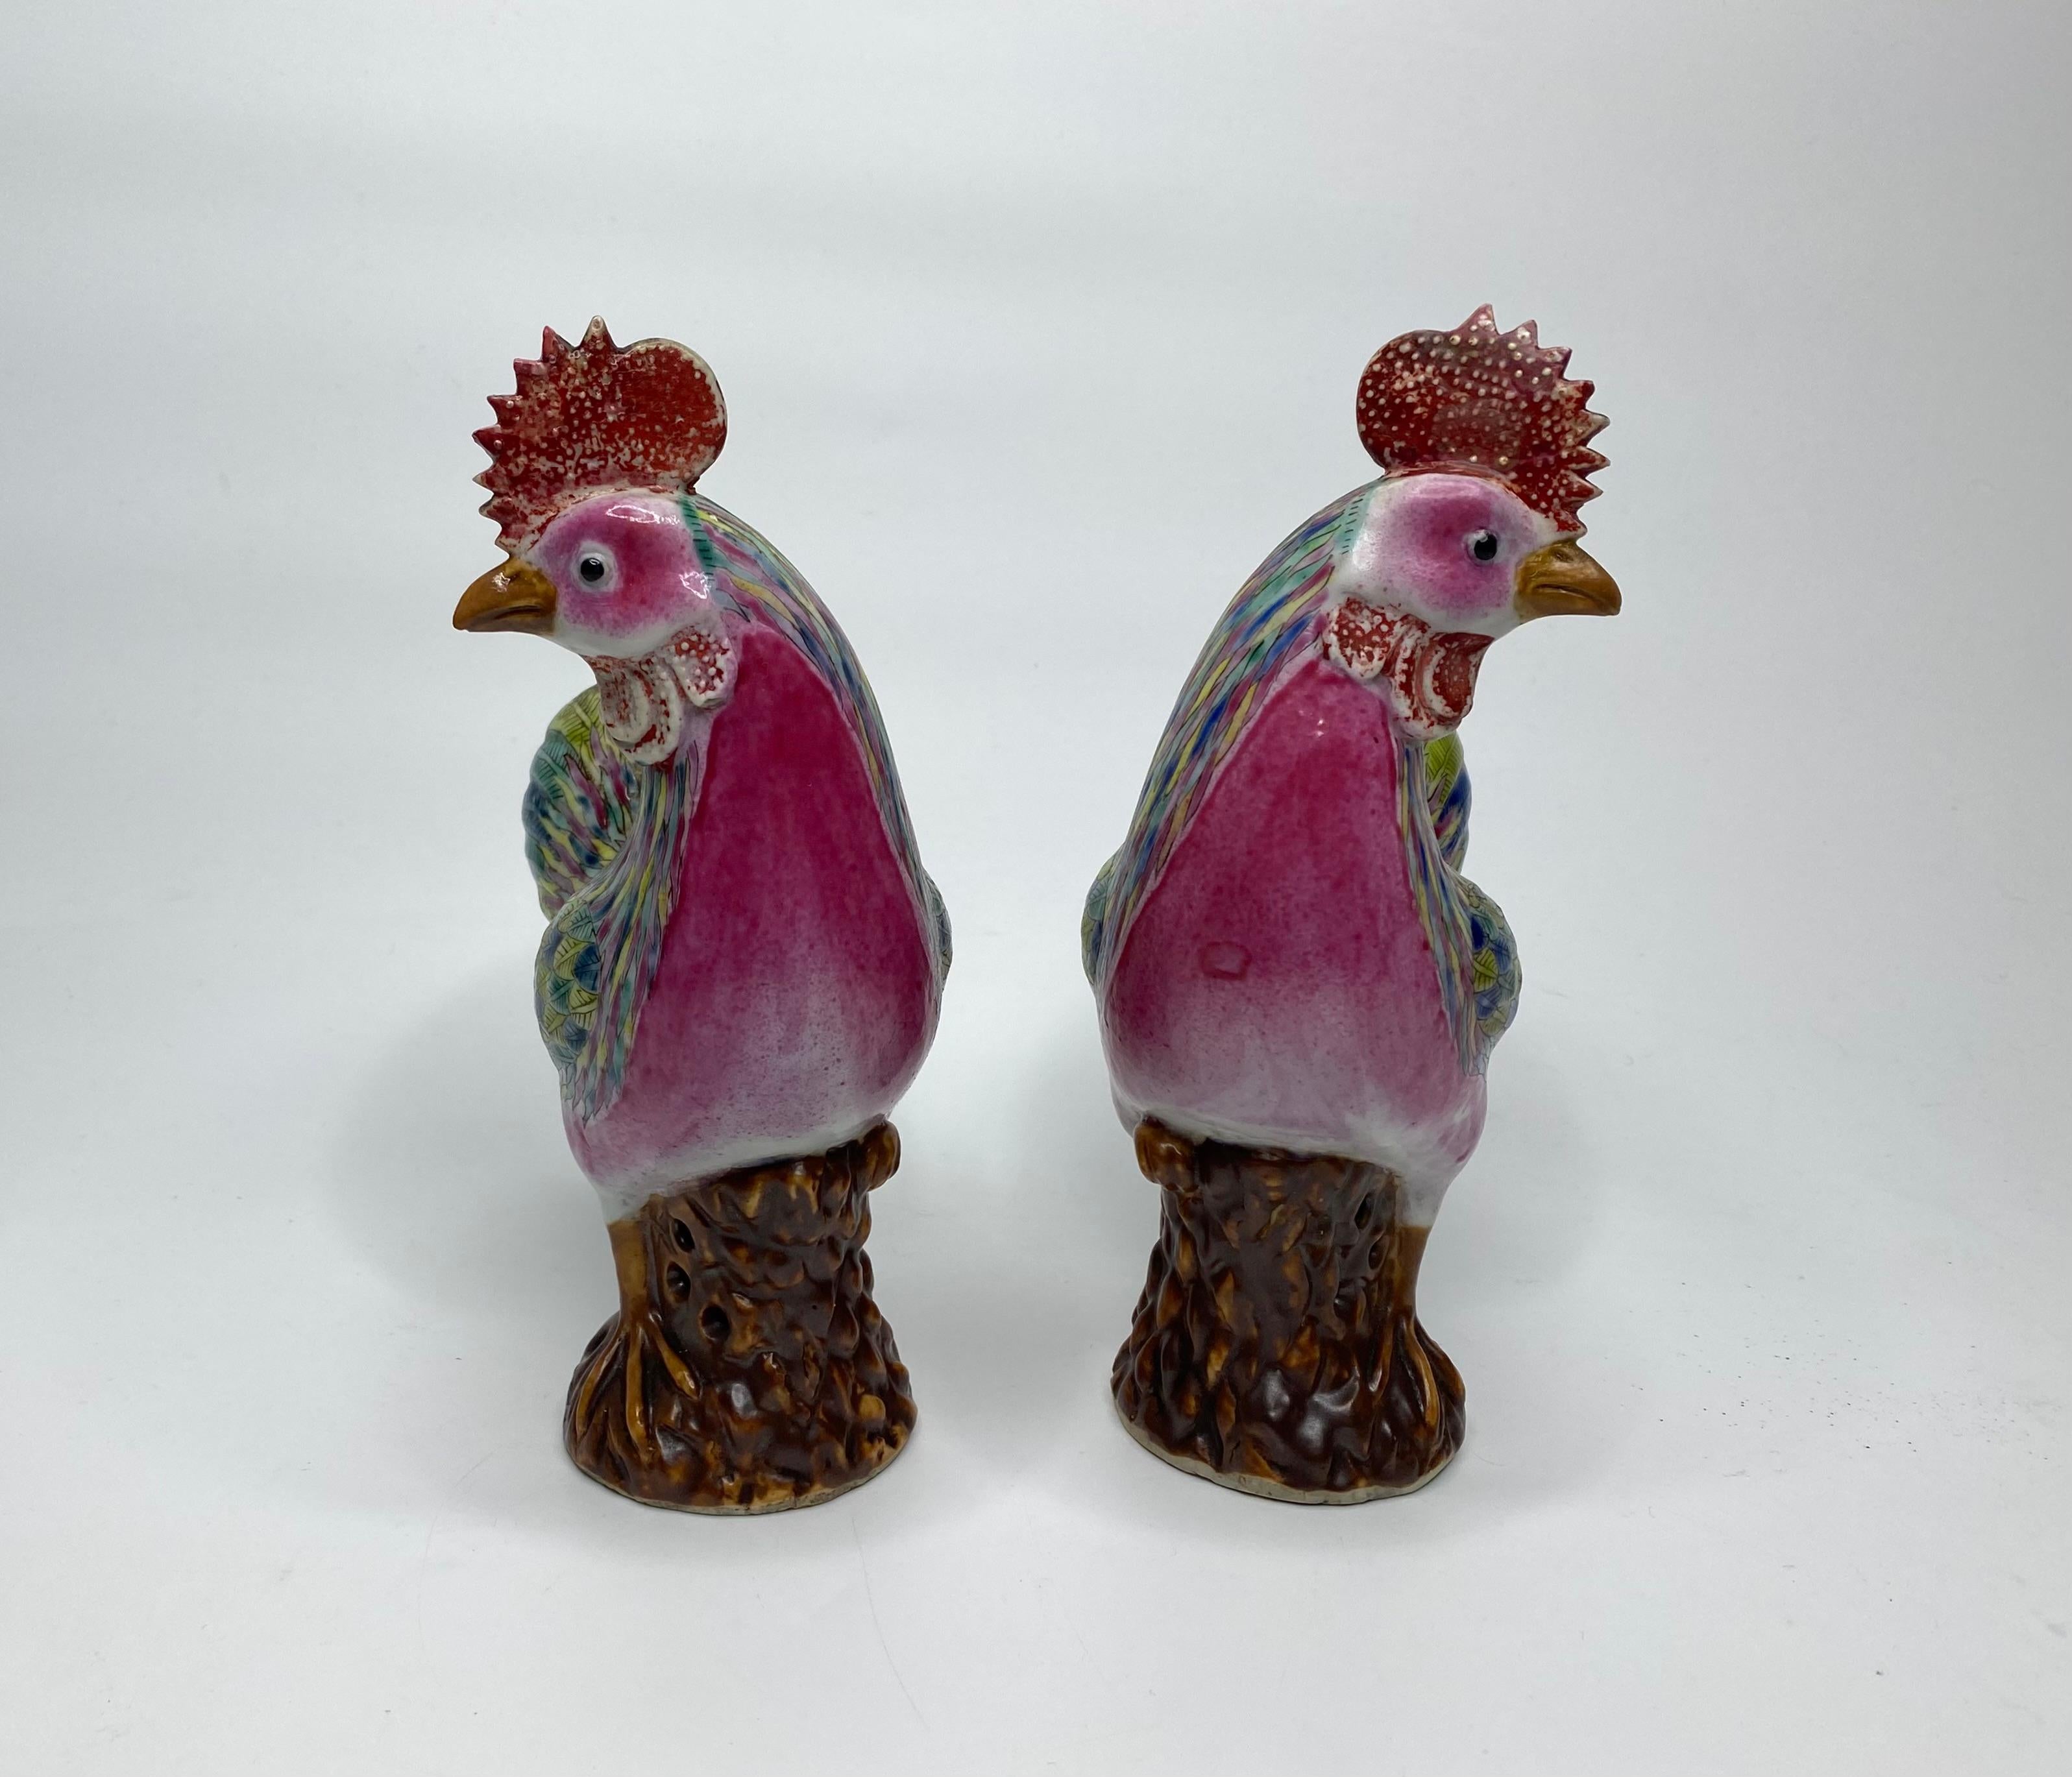 Pair of Chinese porcelain cockerels, c. 1890, Qing Dynasty. Both cockerels modelled standing on rocky bases, and their boldly decorated feathers in famille rose enamels.
Their combs and wattles painted in overglaze red enamel.
Height – 21 cm, 8